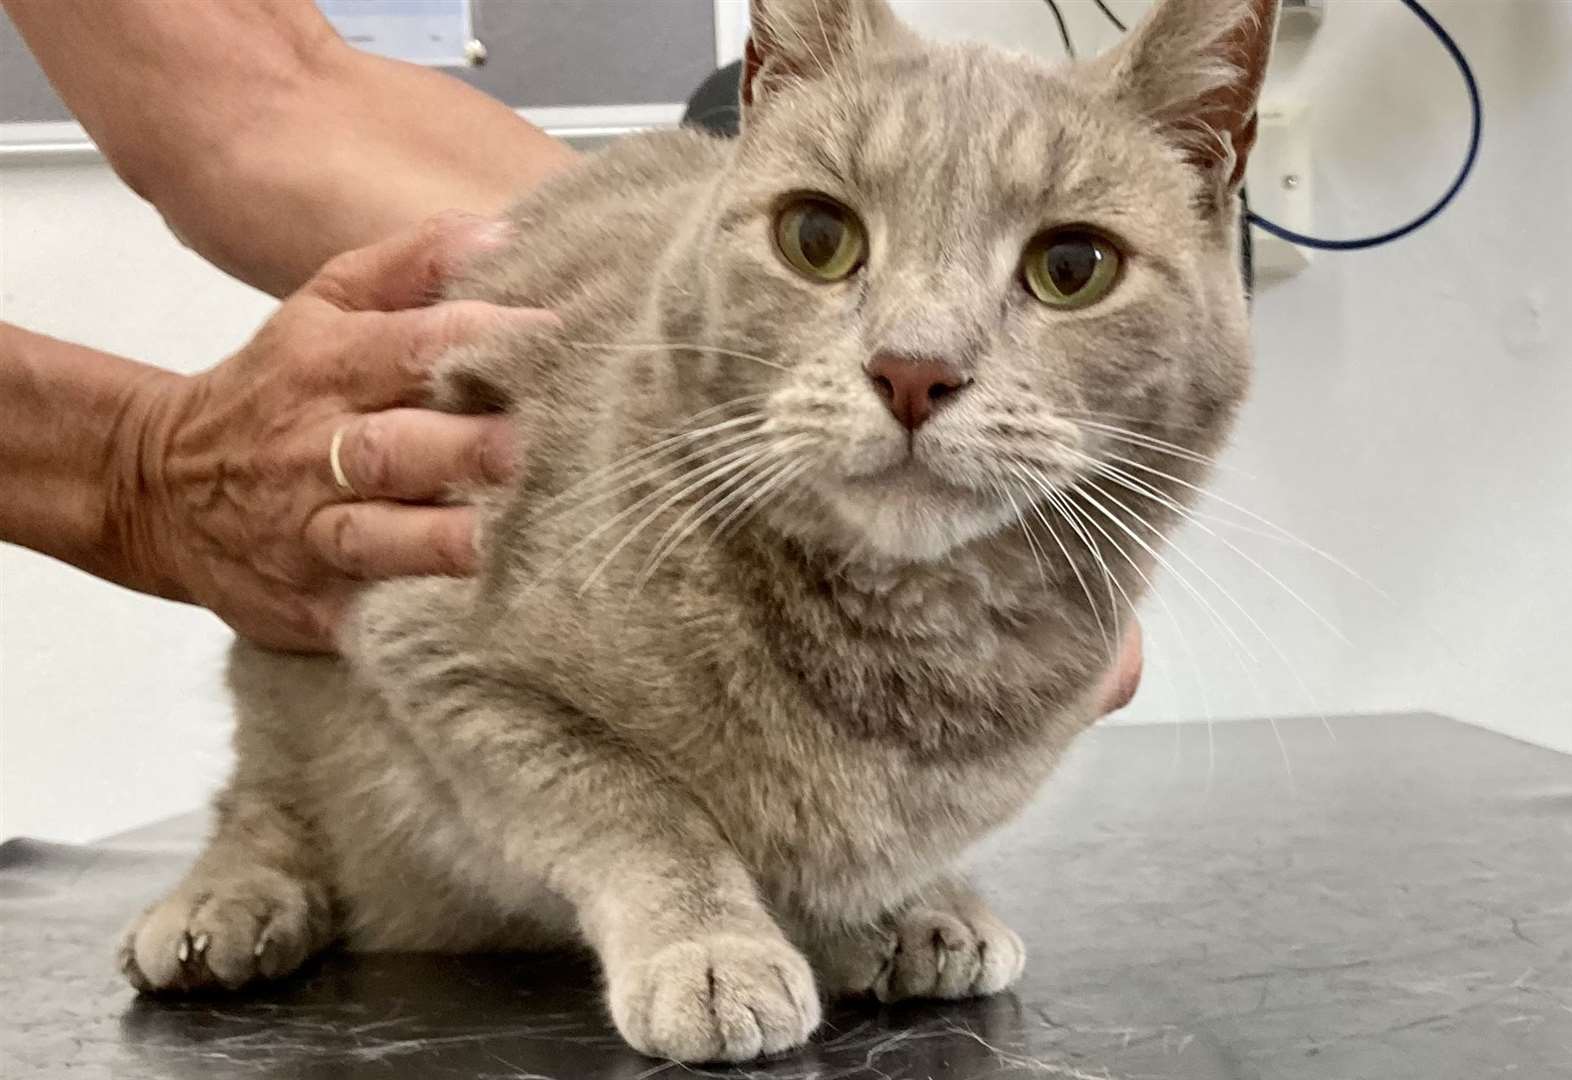 Yoda the cat feels force of 1.5inch thorn through his paw